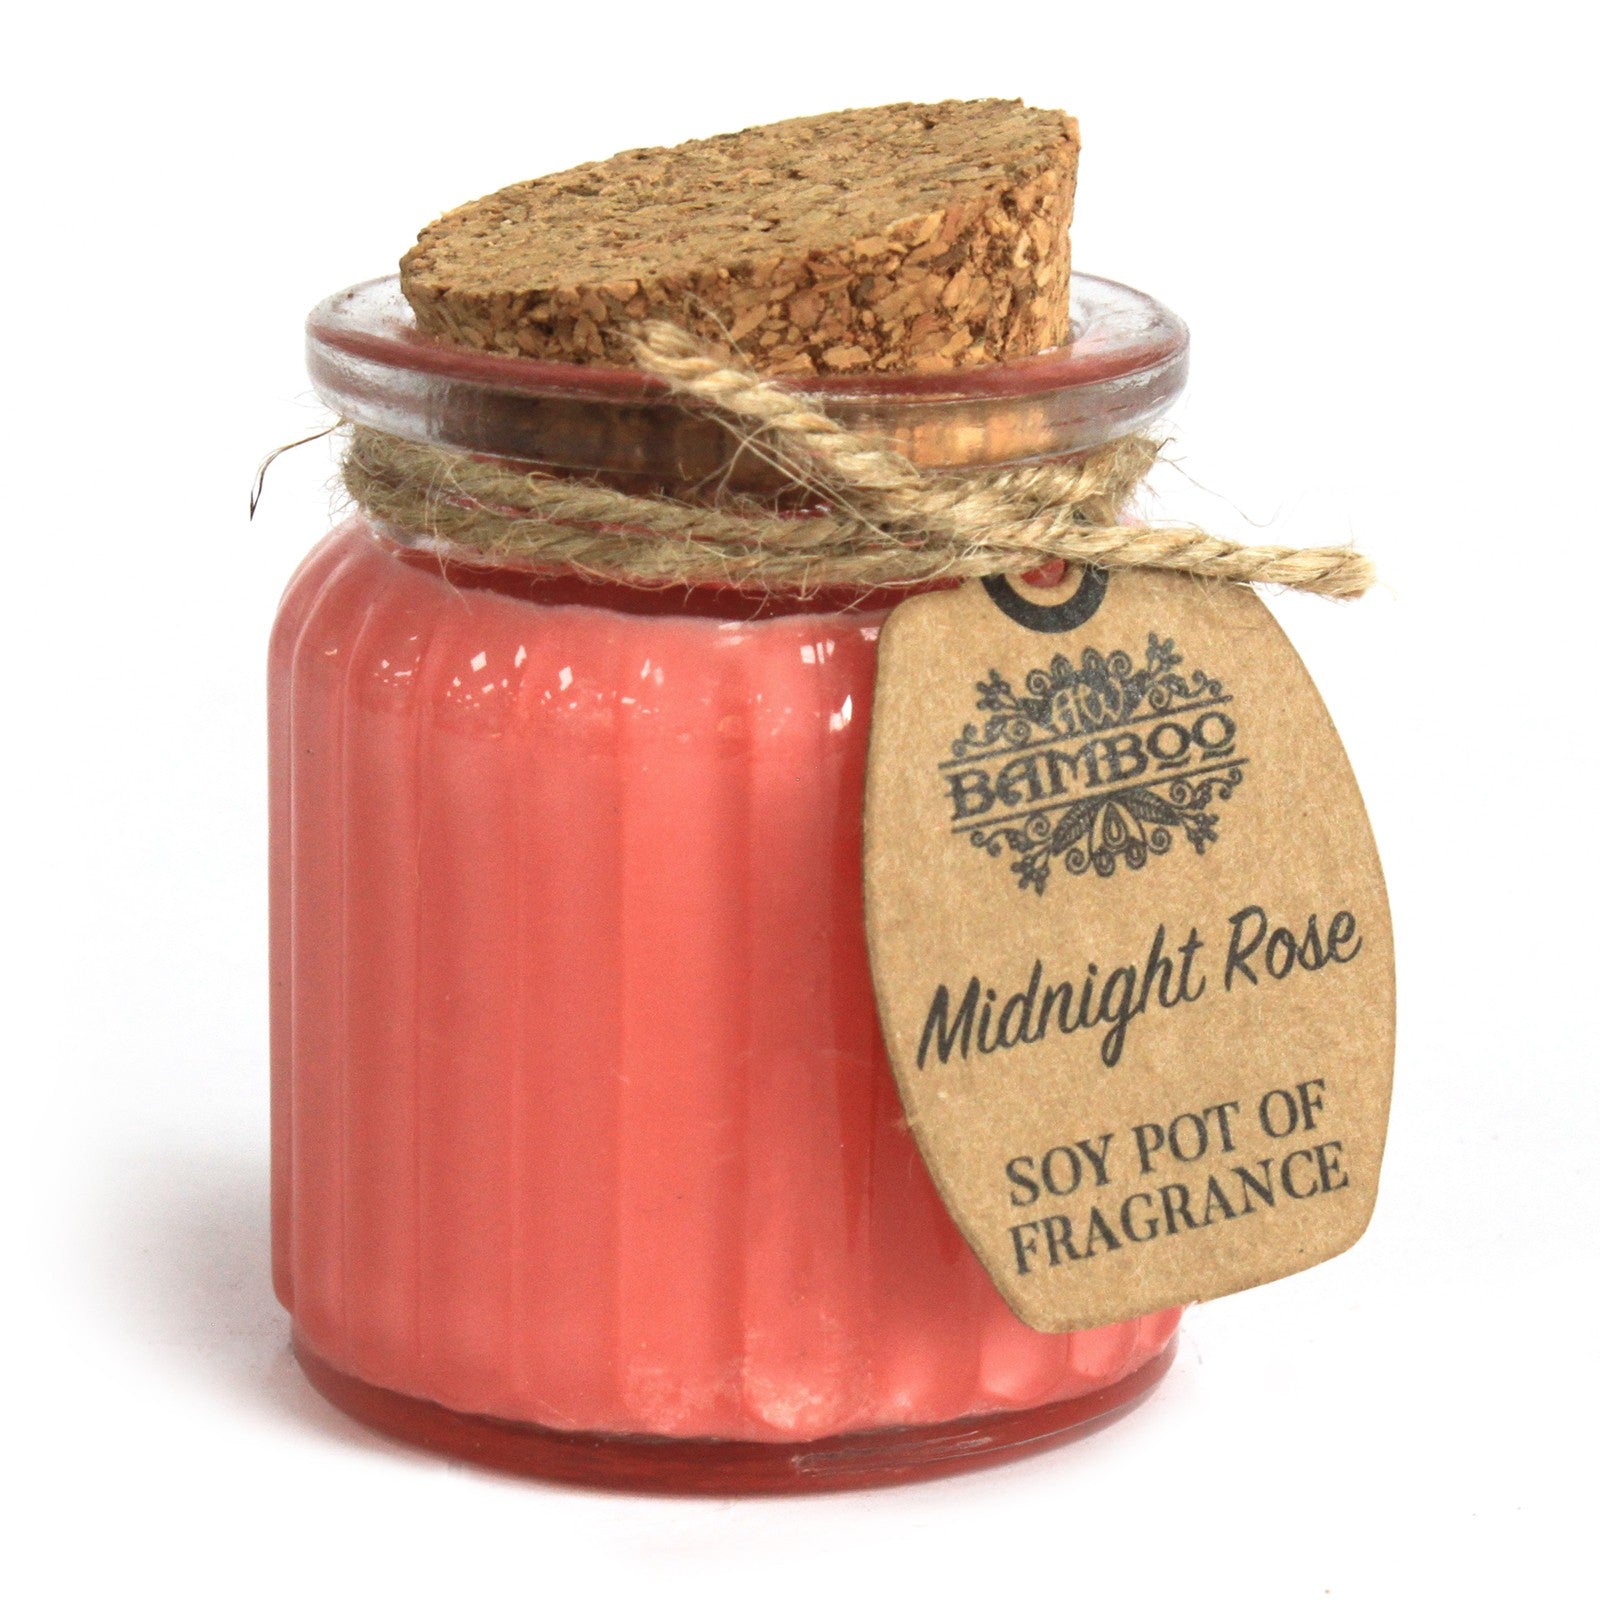 View Midnight Rose Soy Pot of Fragrance Candles information